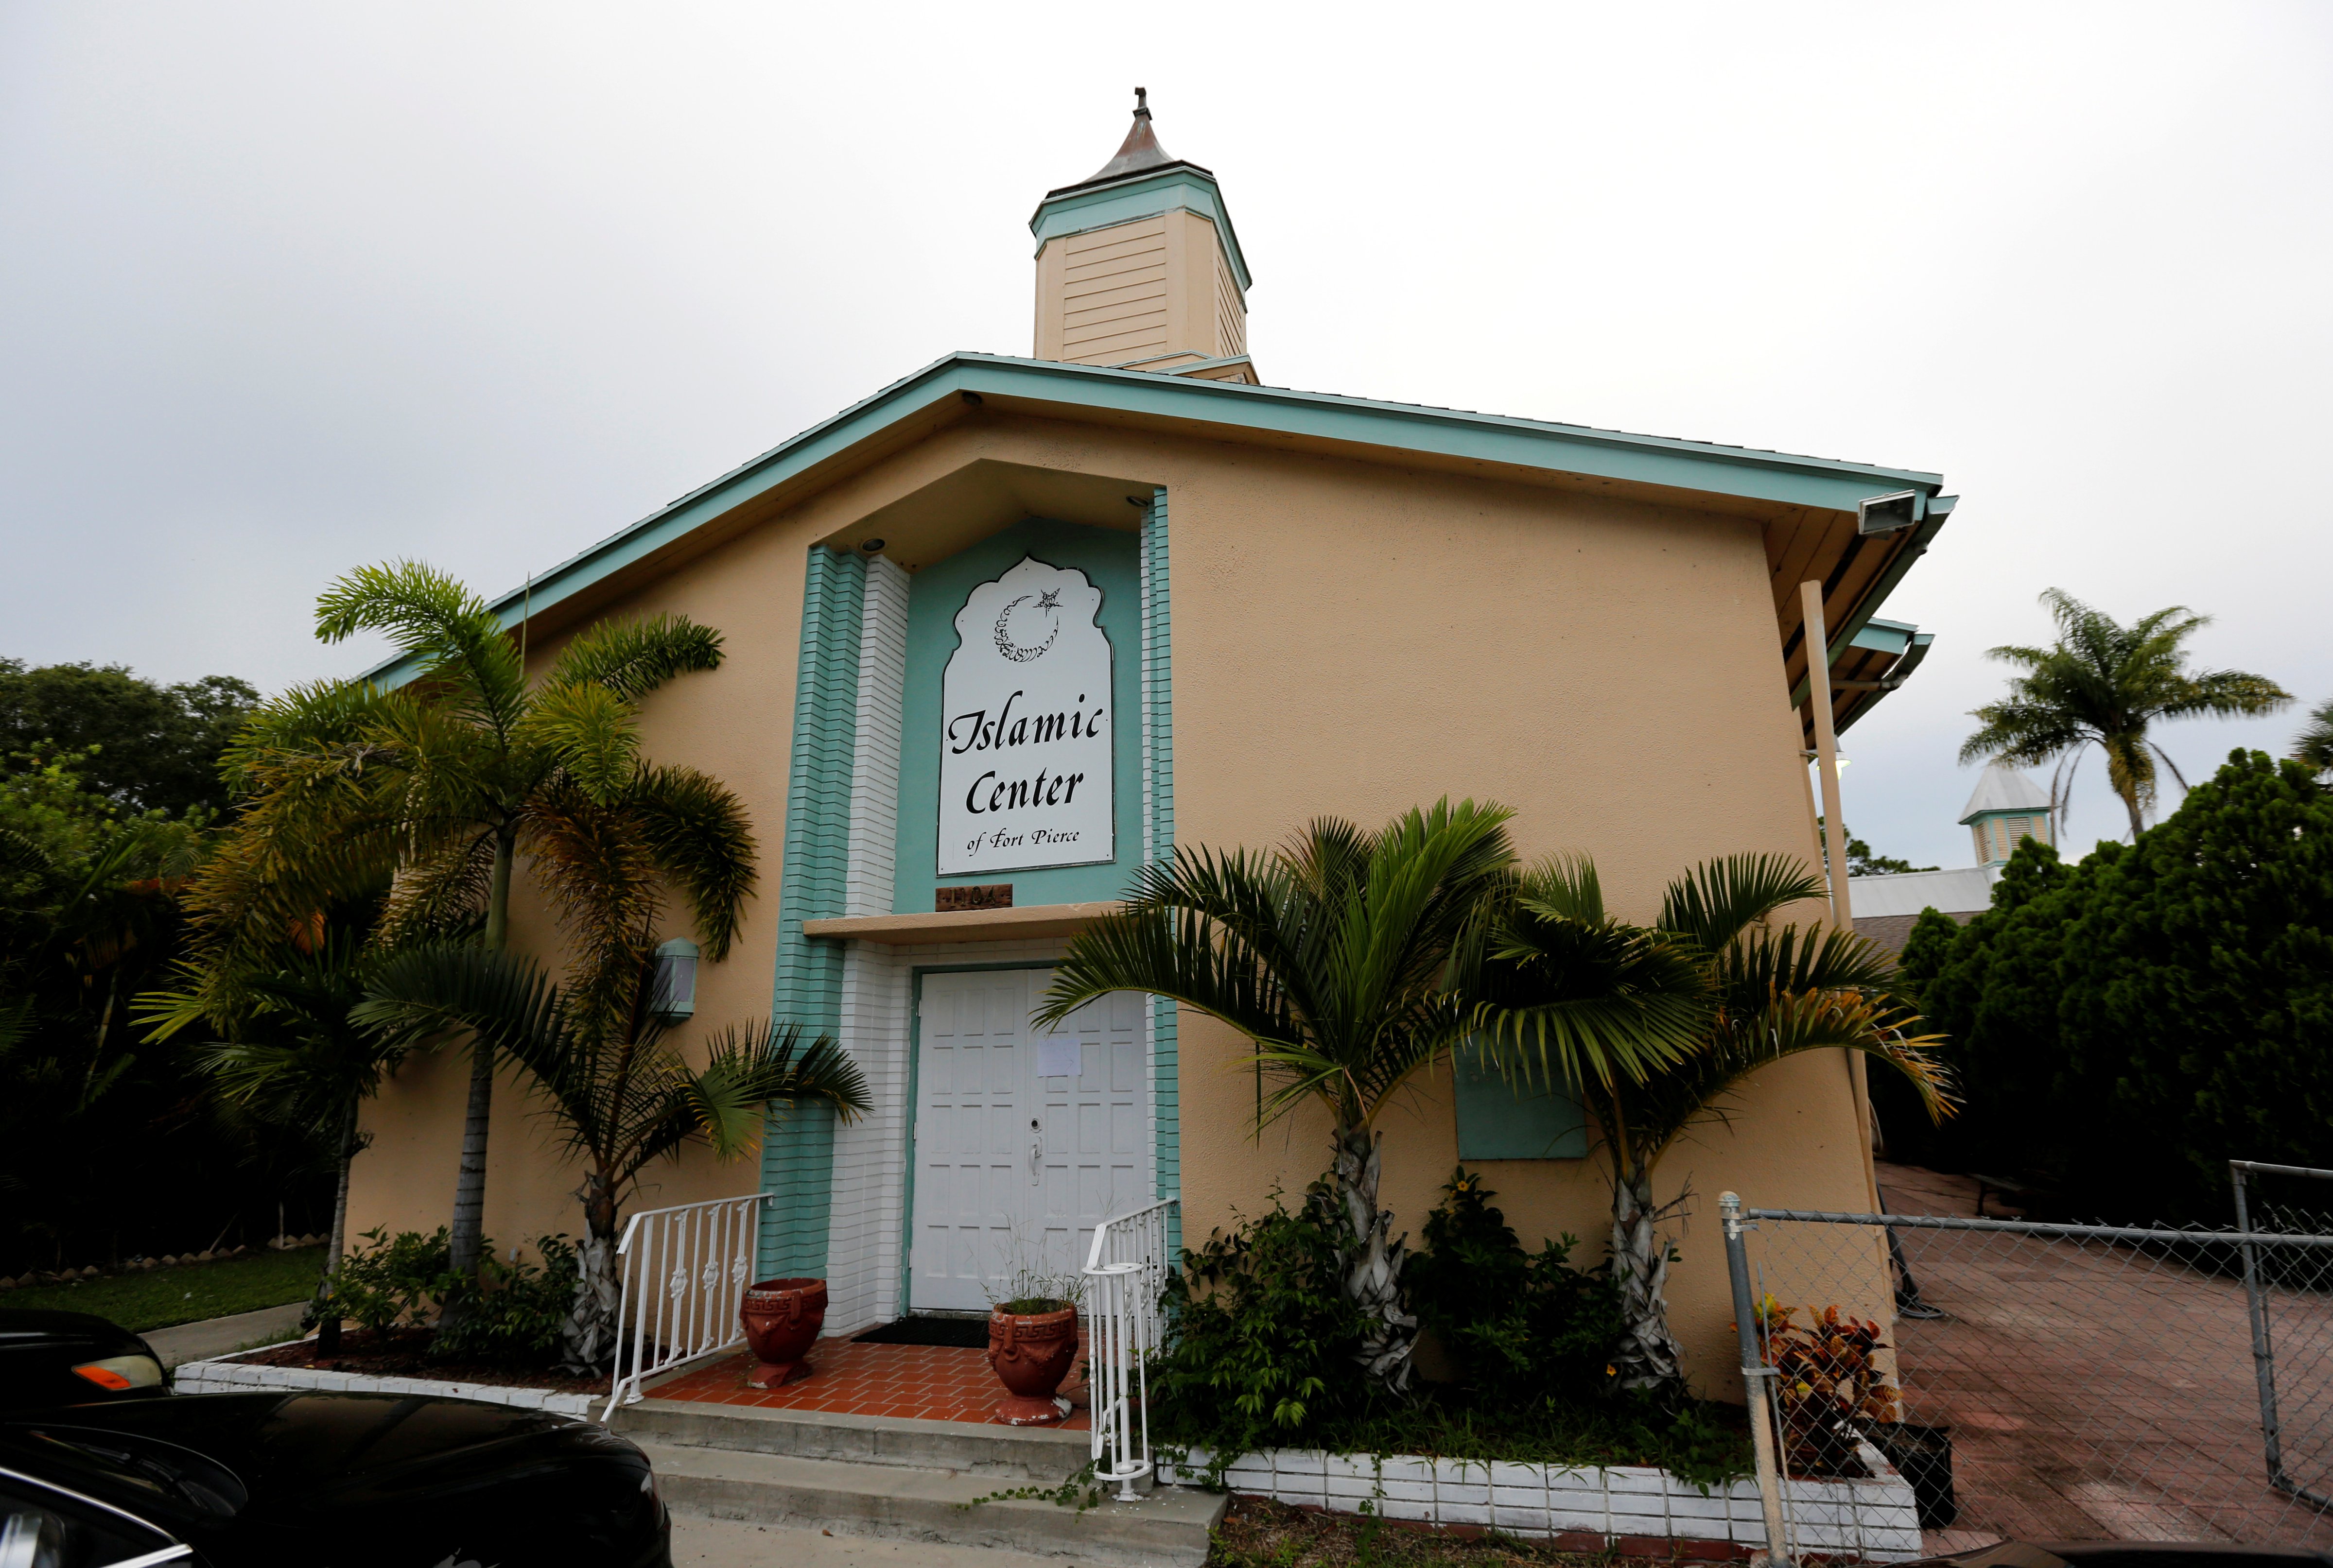 The Fort Pierce Islamic Center in Fort Pierce, Fla., is shown on June 12, 2016, as worshippers take part in a service to offer prayers for victims of the Orlando shooting (Joe Skipper—Reuters)